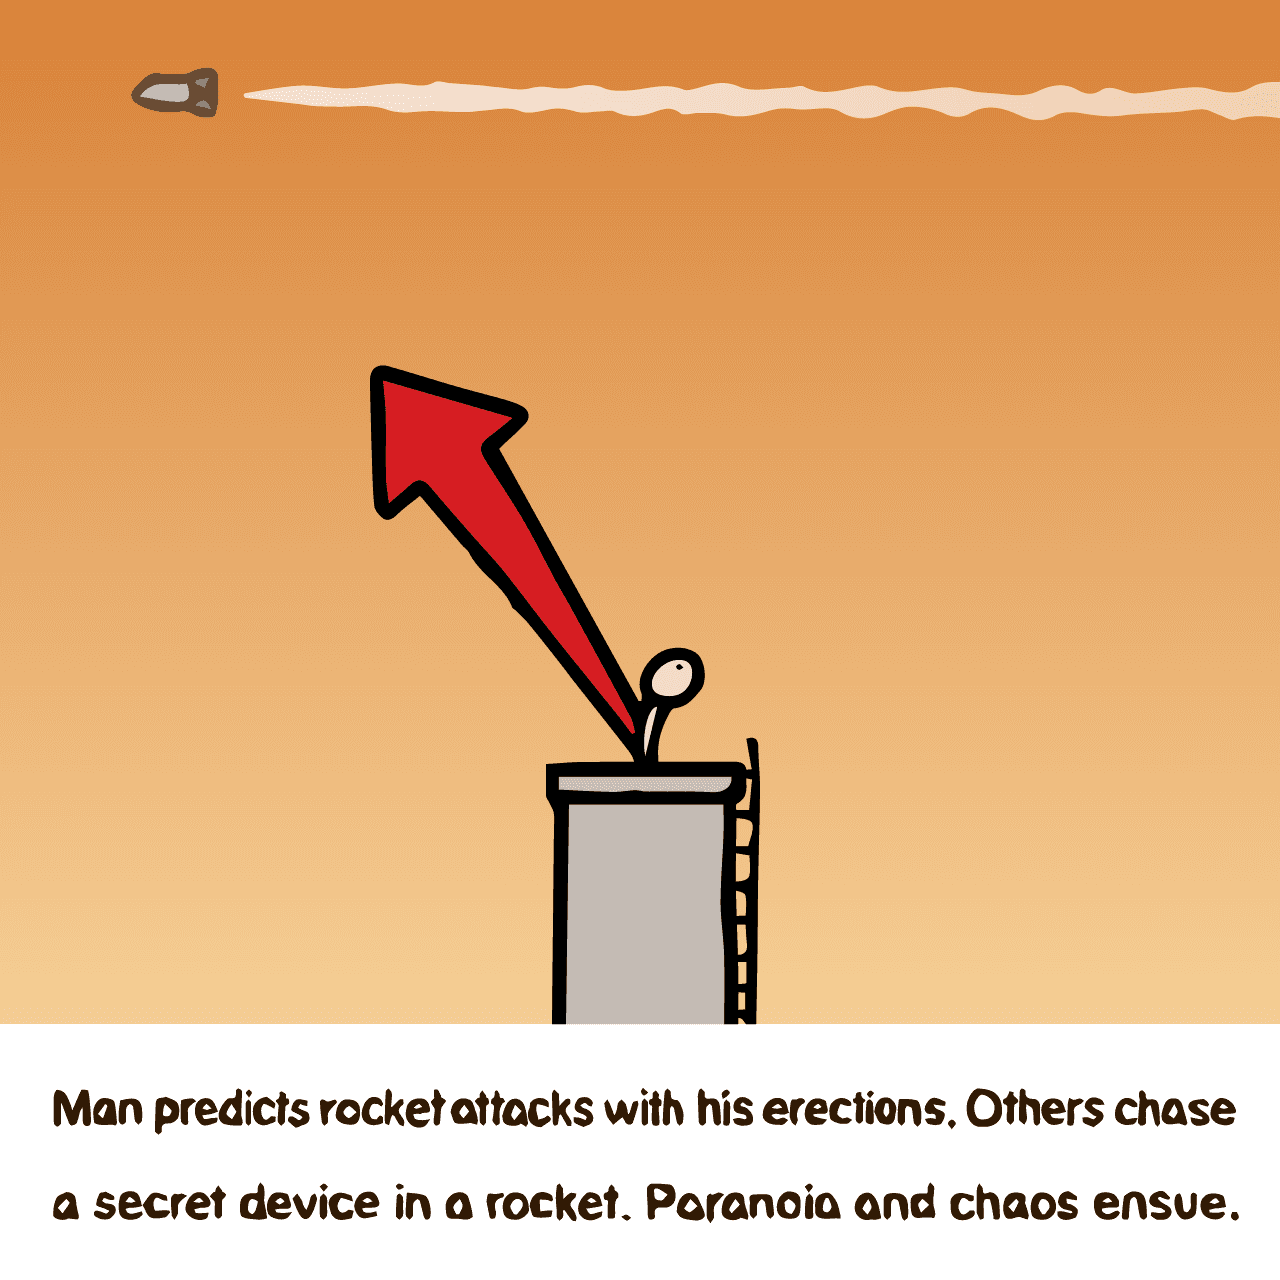 Thomas Pynchon "Gravity's Rainbow : Man predicts rocket attacks with his erections. Others chase a secret device in a rocket. Paranoia and chaos ensue."